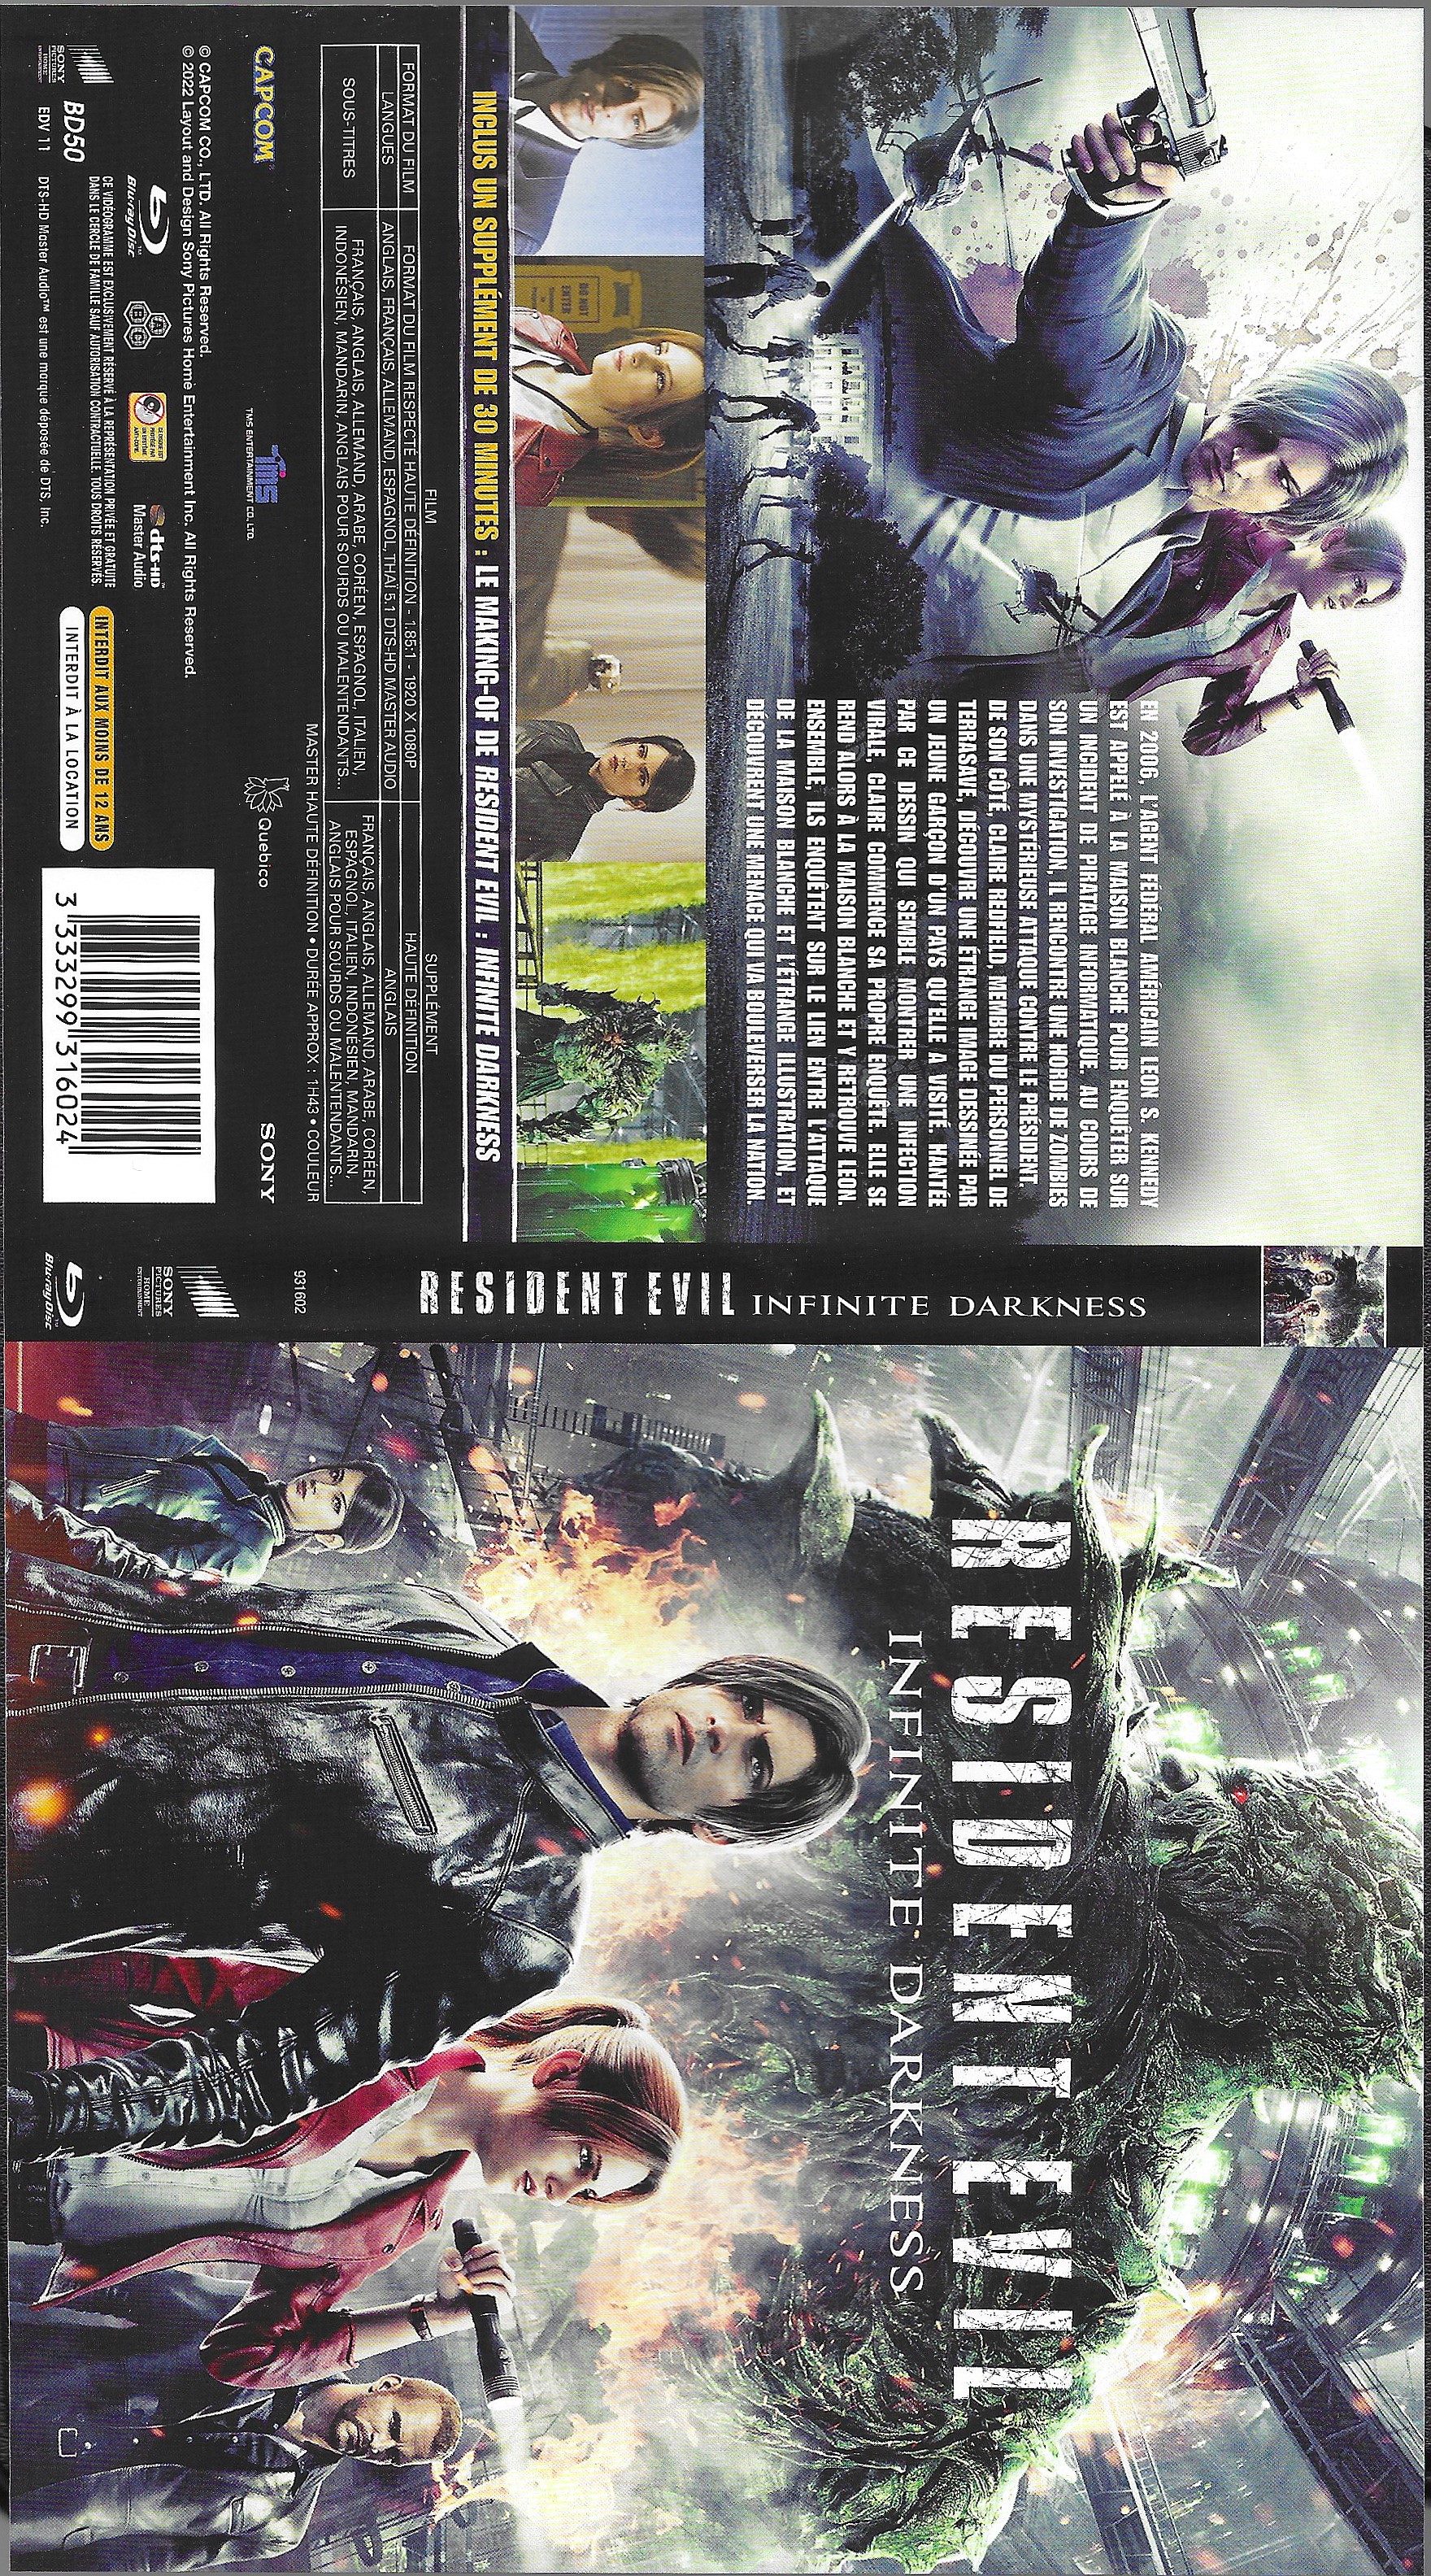 Jaquette DVD Resident Evil Infinite Darkness (BLU-RAY)